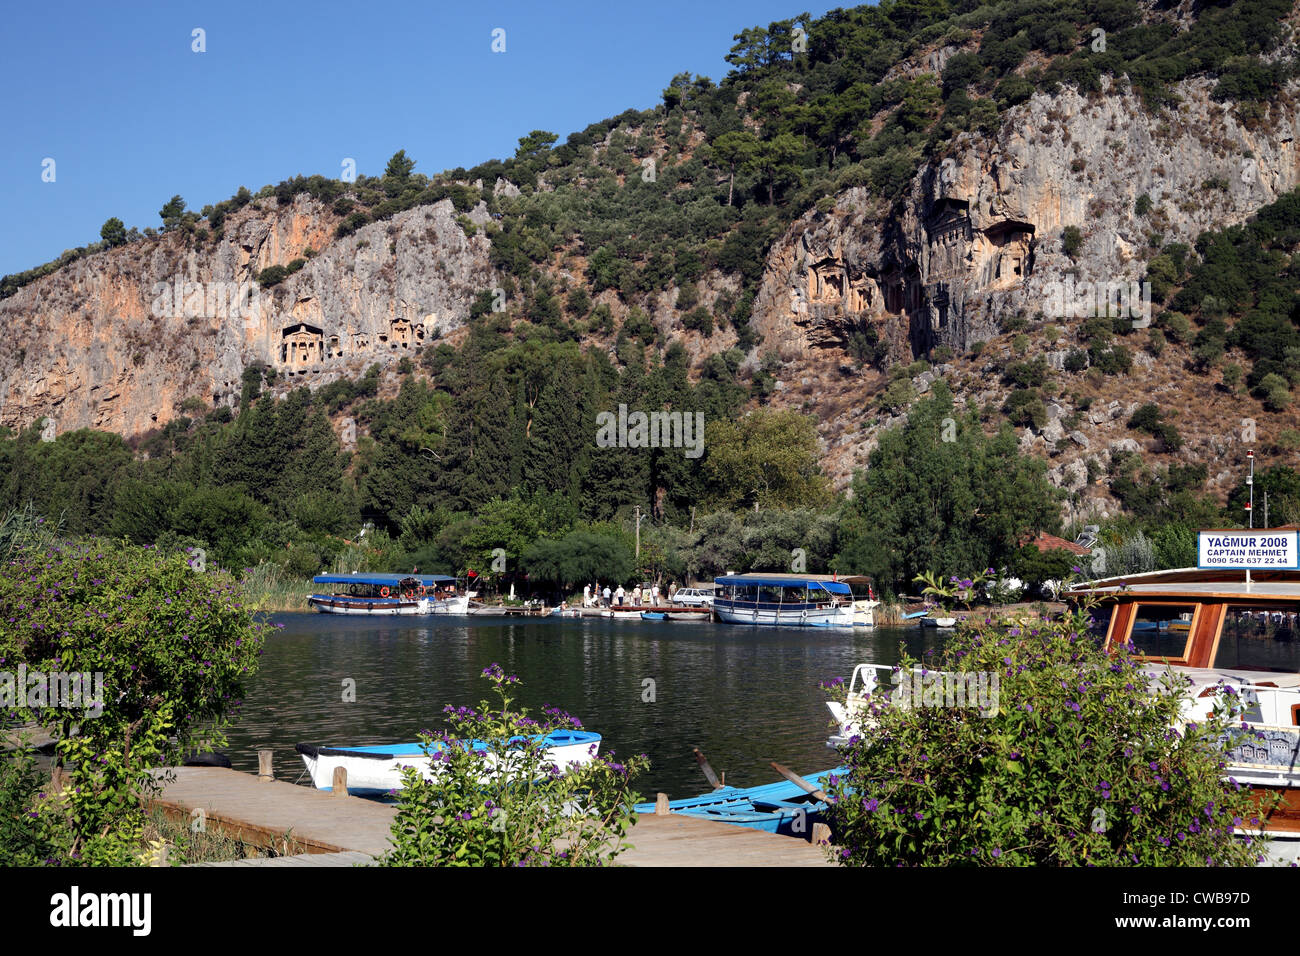 Landscape view of Lycian rock tombs across the river from Dalyan town, Turkey with river boats in the foreground Stock Photo